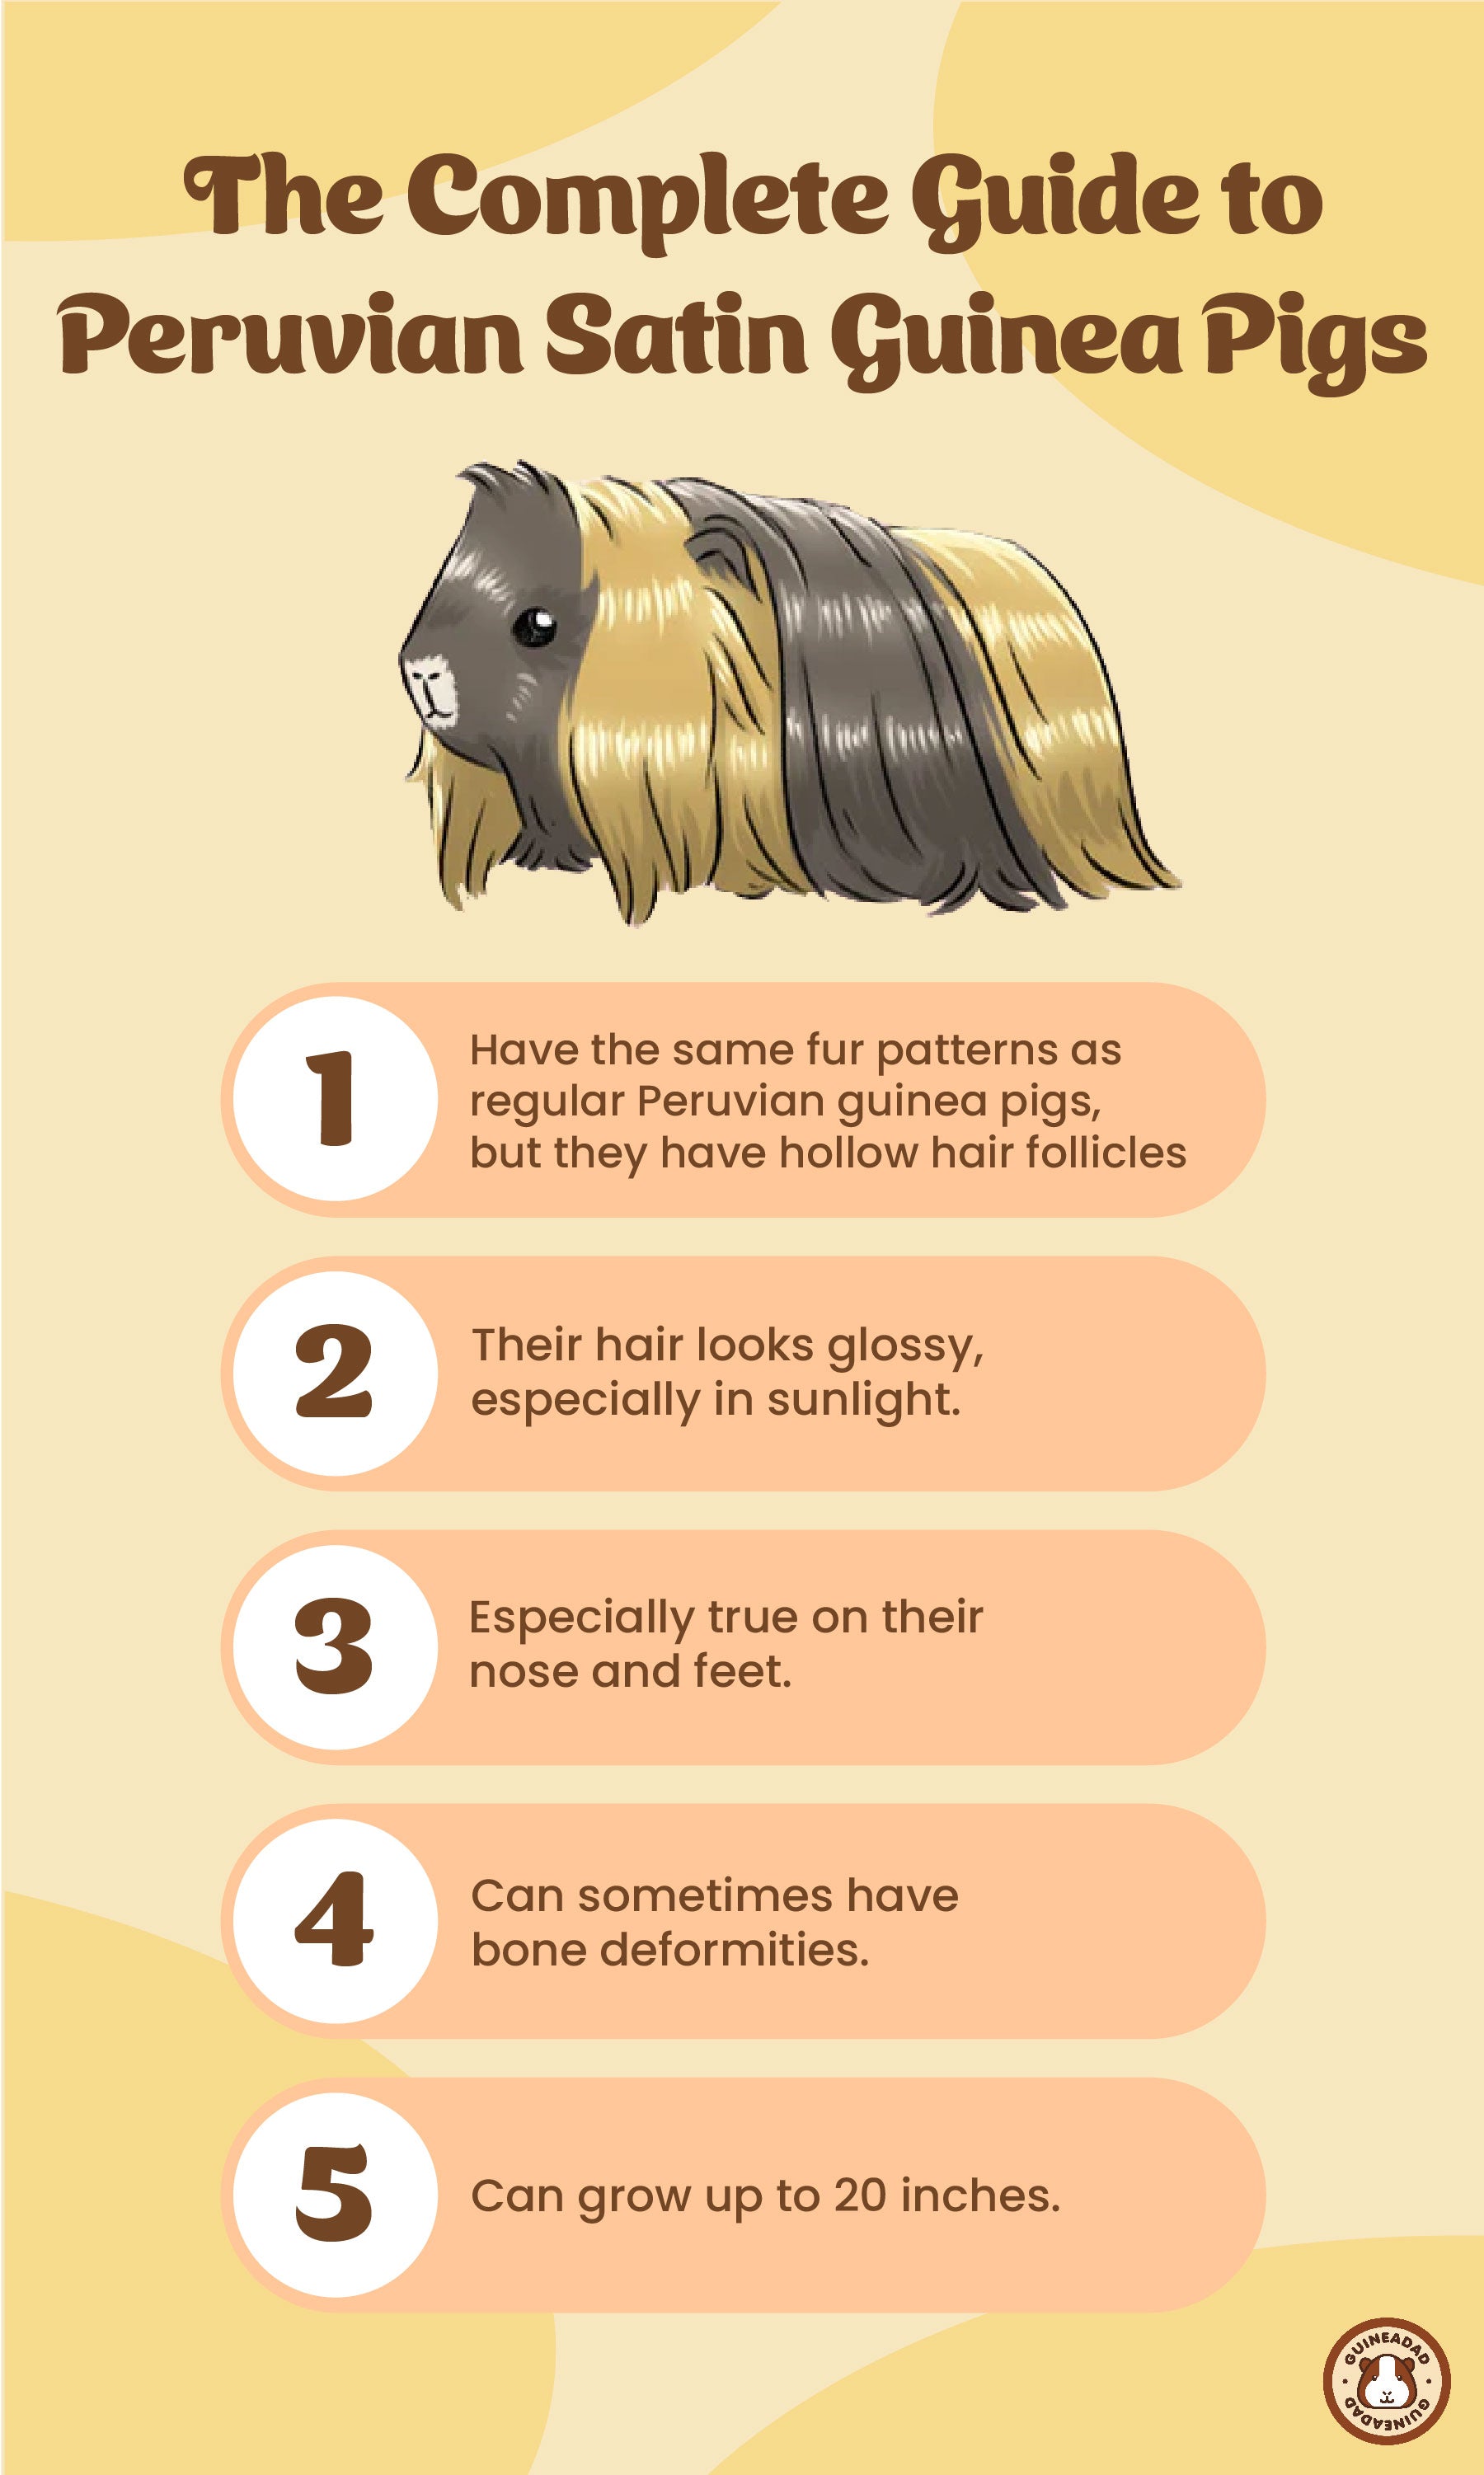 Infographic displaying the physical characteristics of Peruvian Satin Guinea Pigs